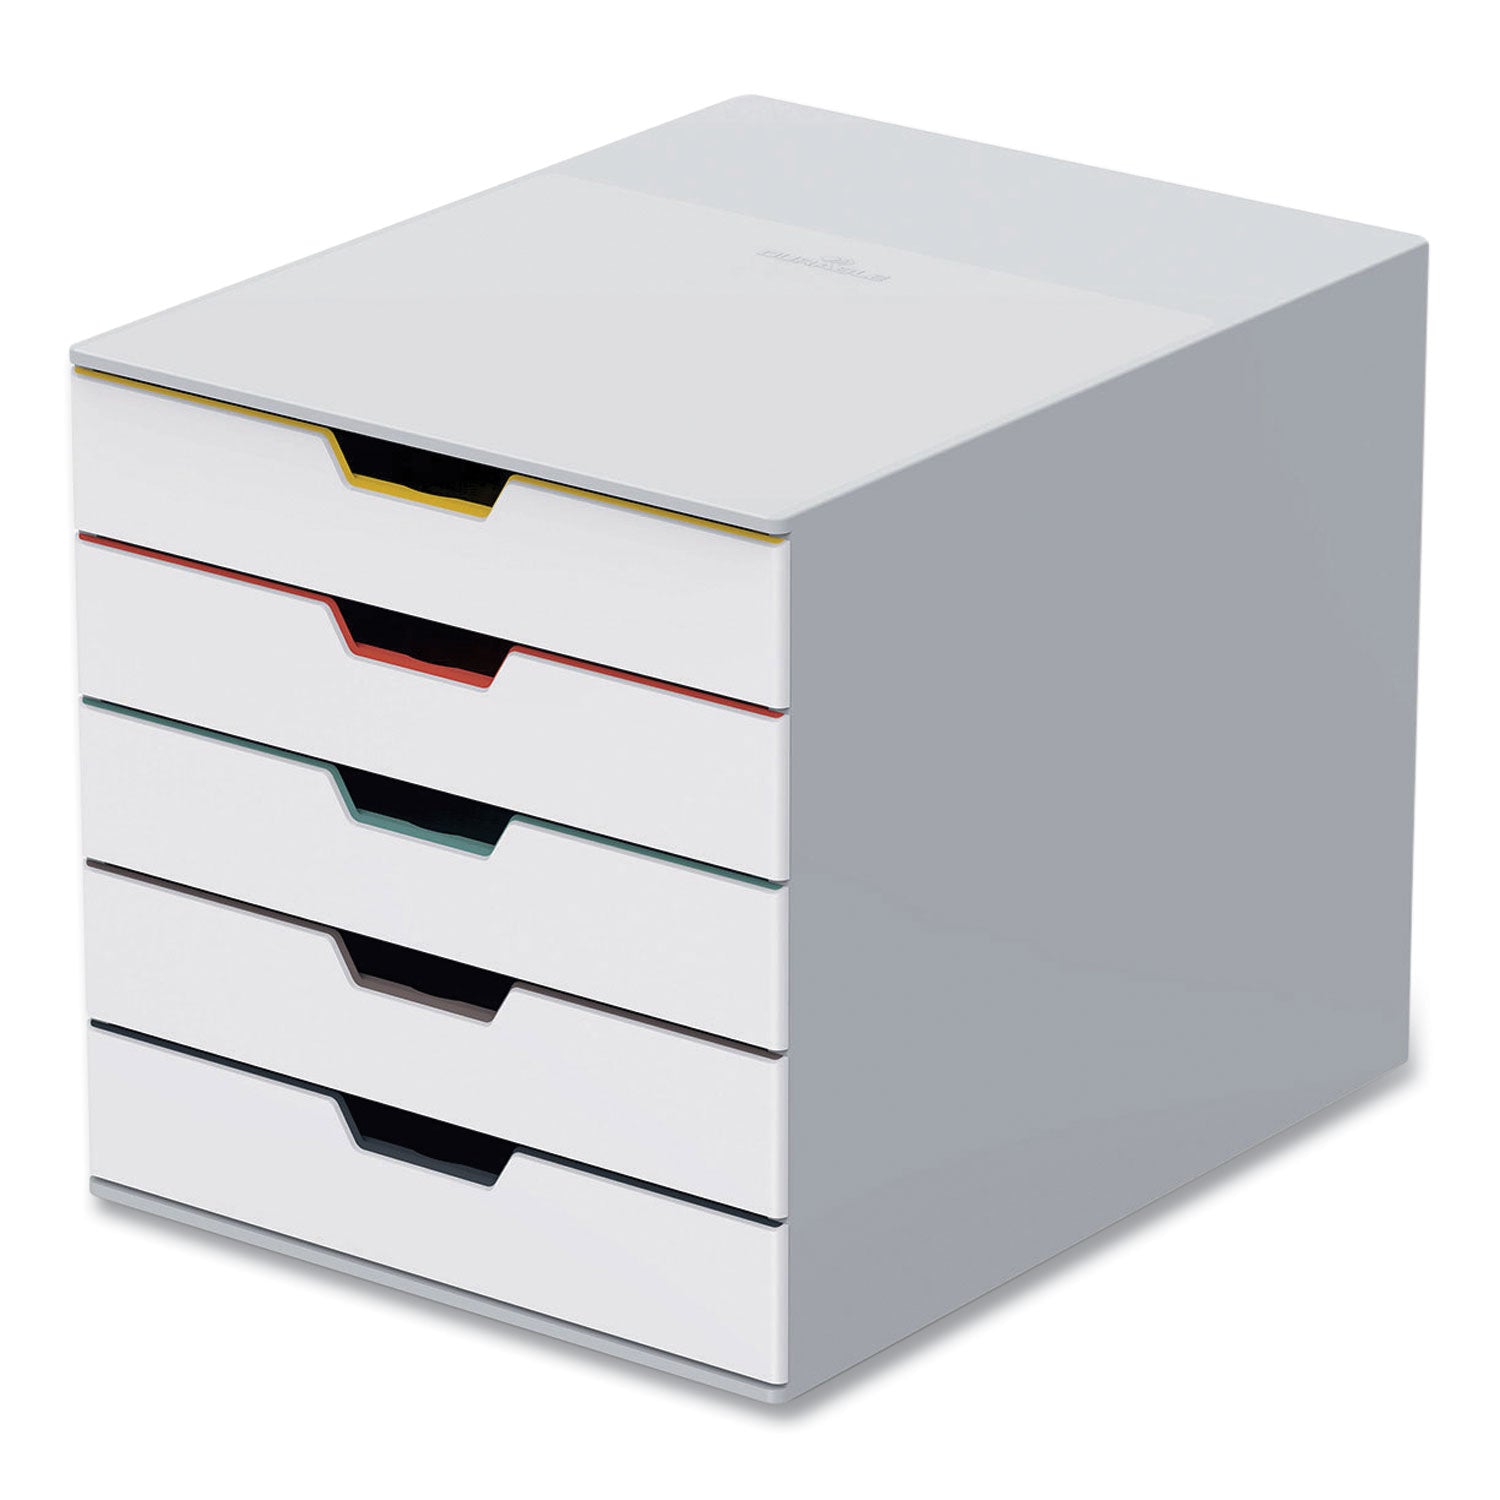 desktop-document-sorter-5-sections-for-file-size-a4-to-c4-11-x-14-x-115-assorted-colors_dbl762527 - 2